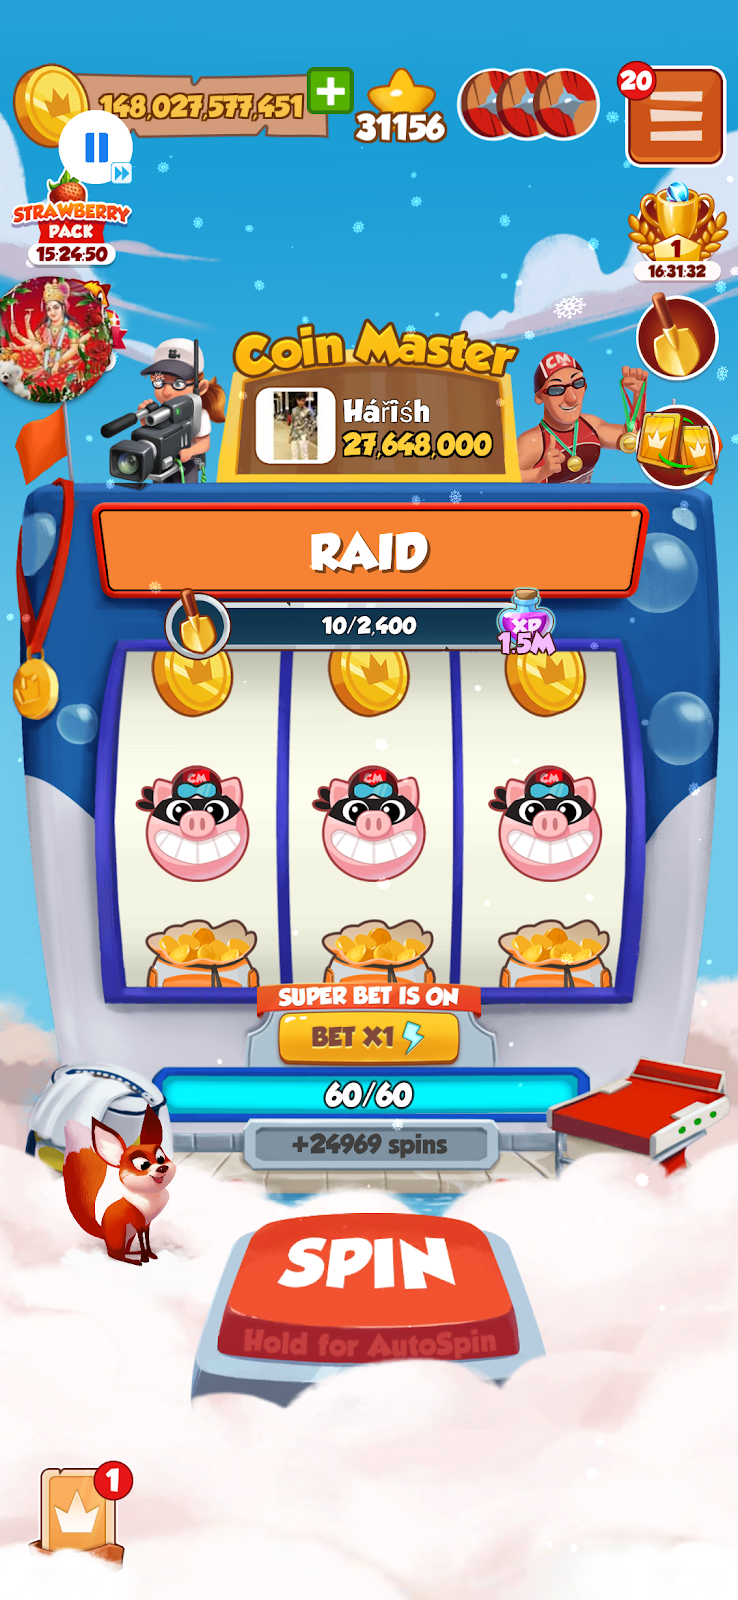 Daily Coin Master Free Coins, Spins and Gifts